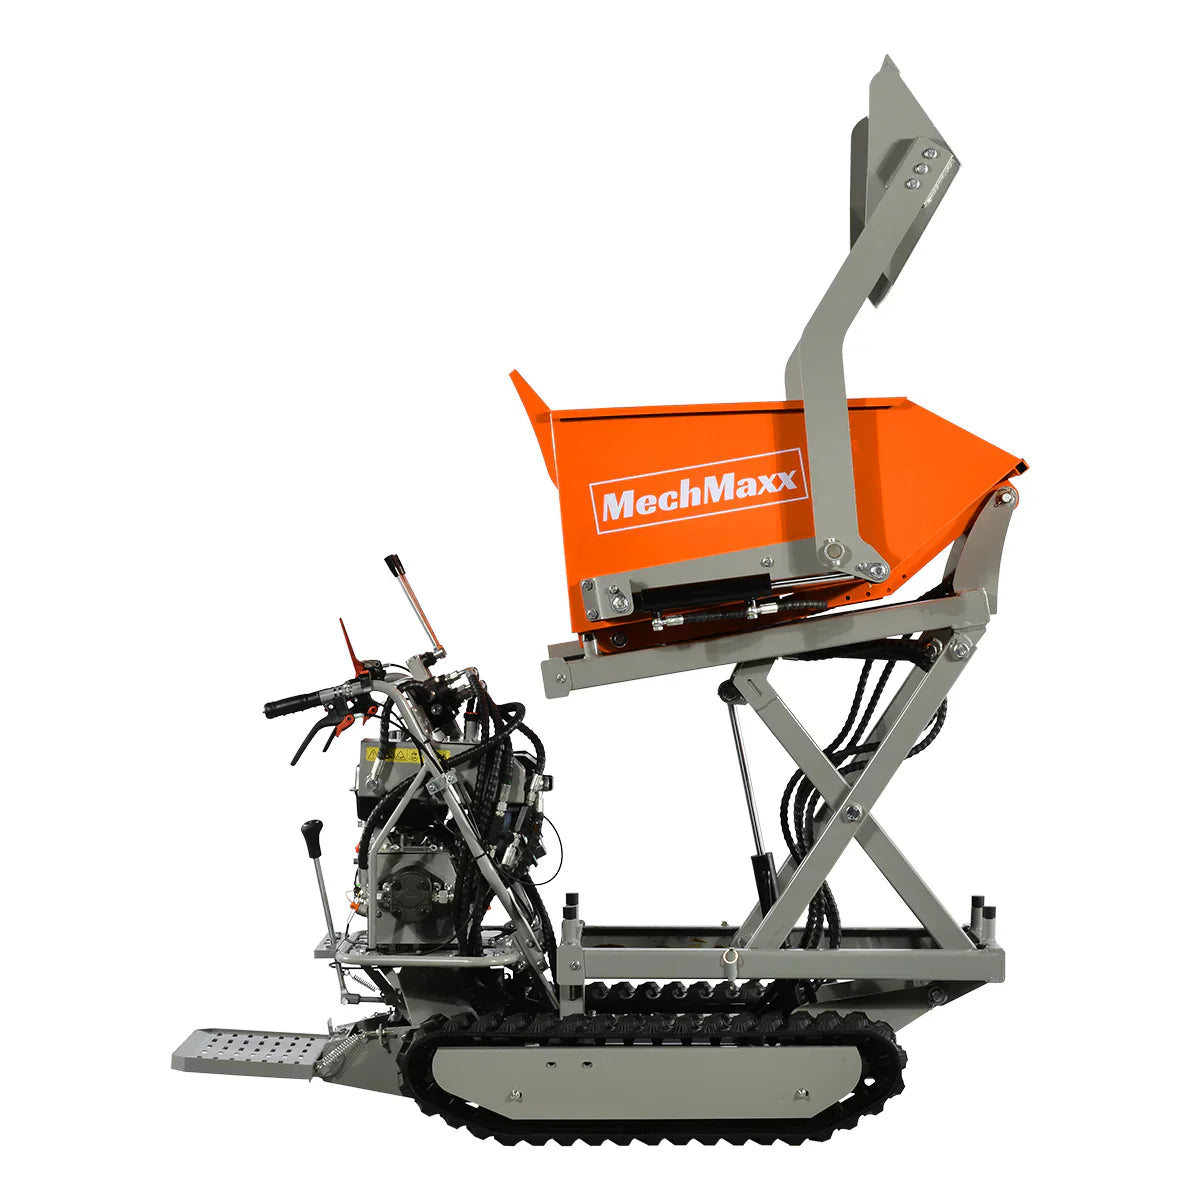 1100lbs Capacity 10HP 301cc Gas Engine Tracked Dumper Hydraulic Tipping and Lifting with Front Shovel